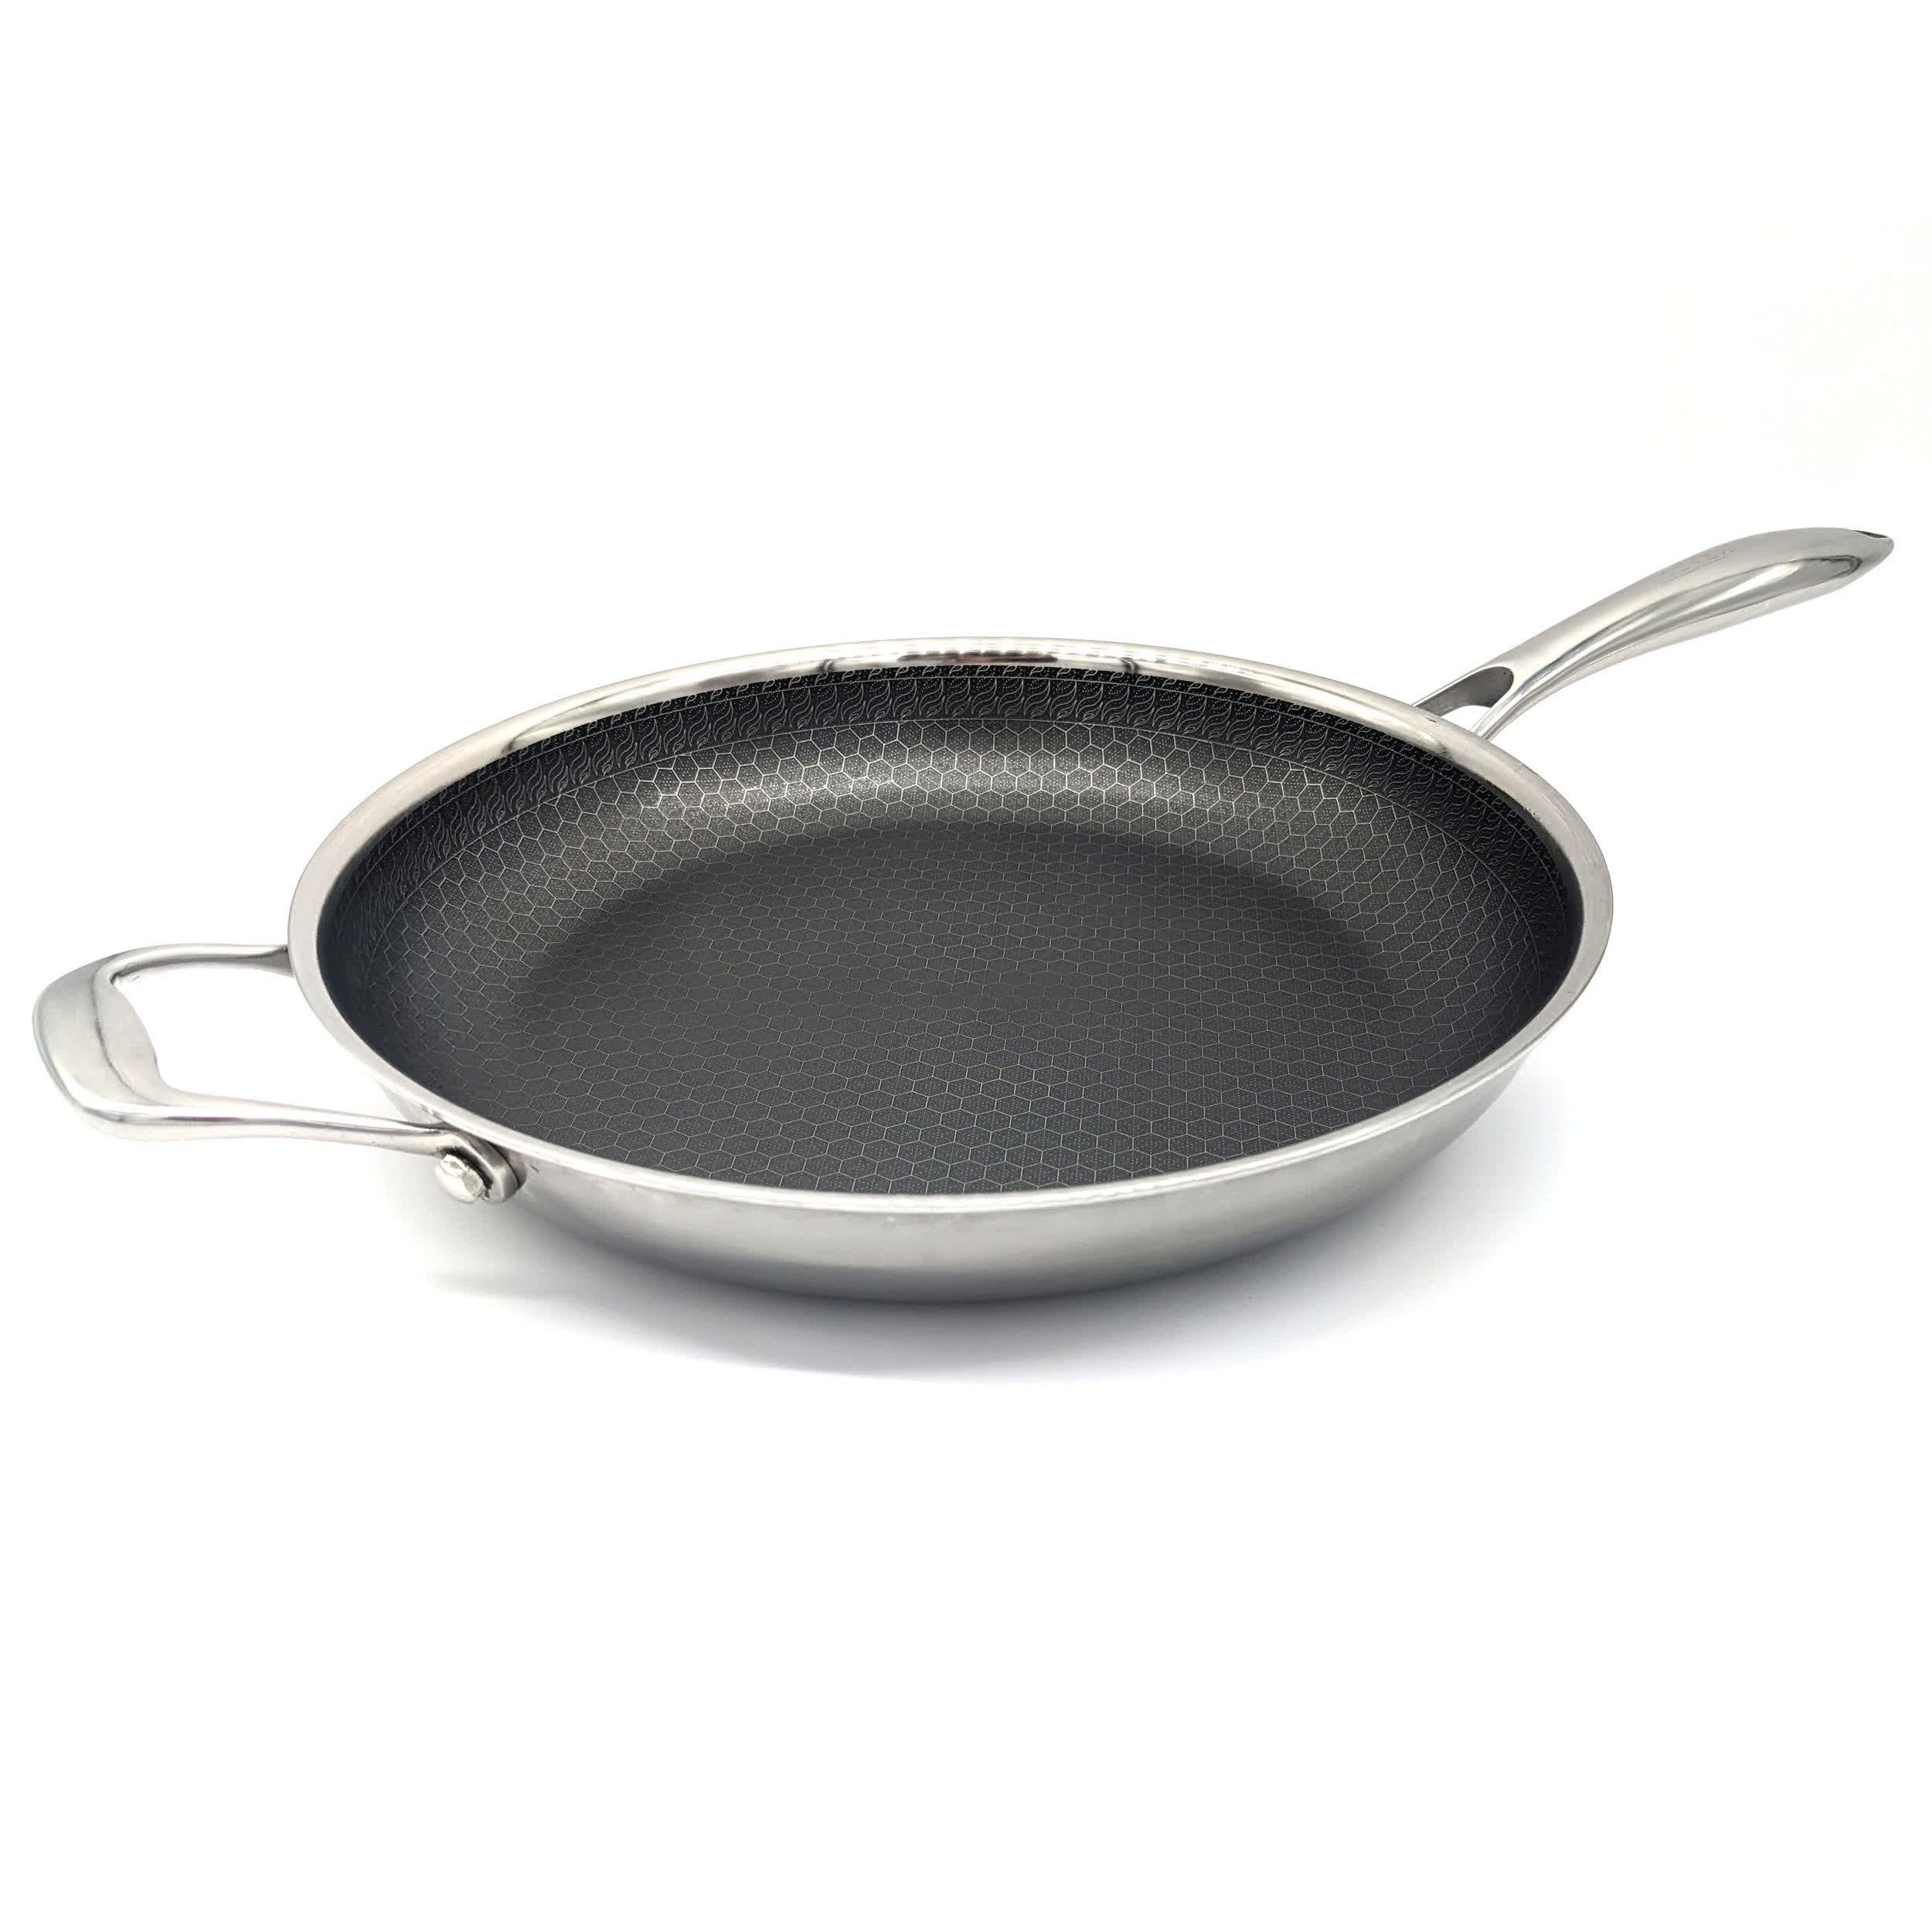 NEW 12 HexClad Hybrid Pan with Lid - household items - by owner